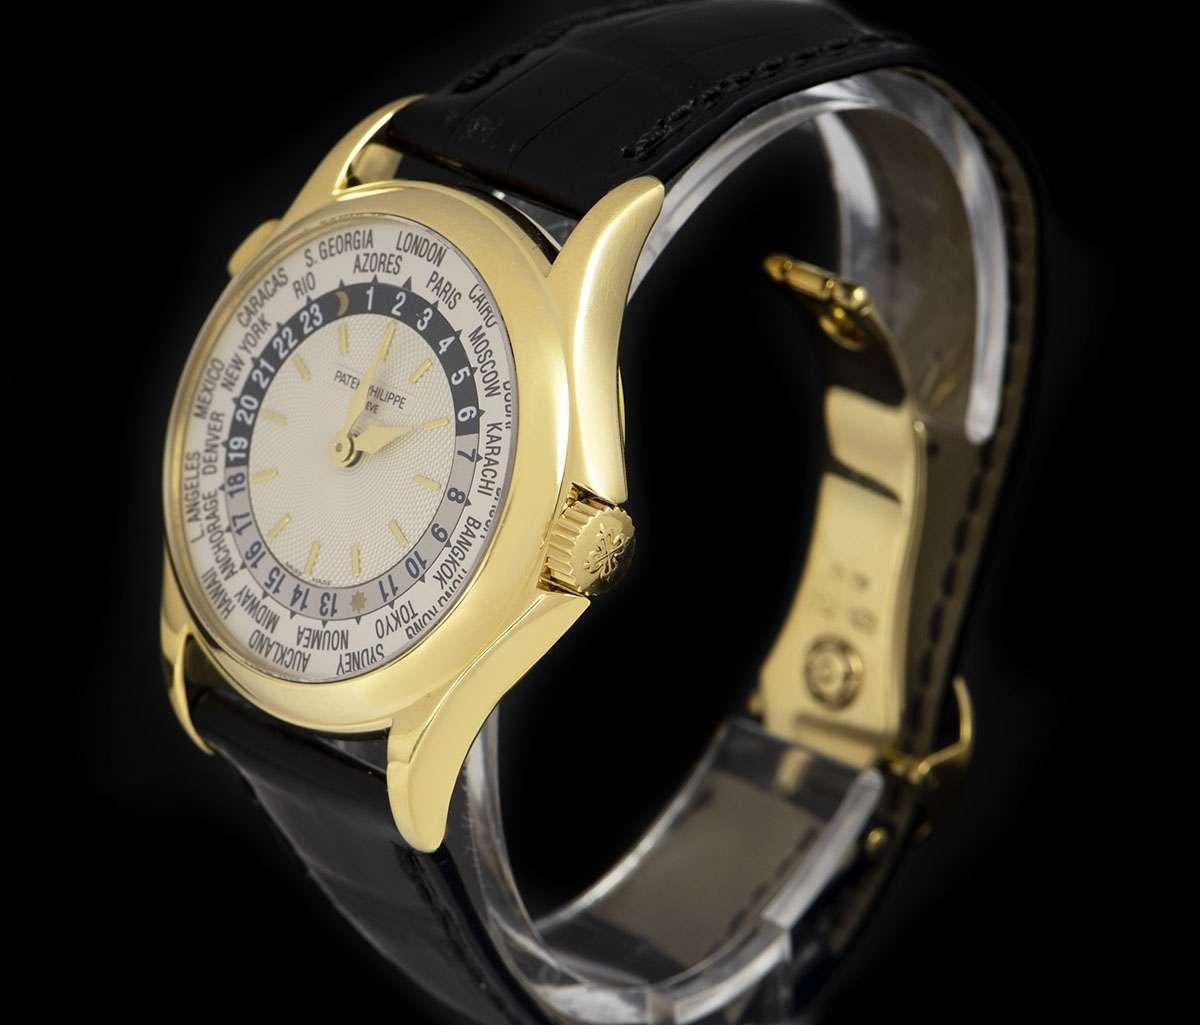 An 18k Yellow Gold World Time Gents Wristwatch, silver dial with applied hour markers, 24 hour indicator with day/night display, 24 time zones on the outer edge of the dial, a fixed 18k yellow gold bezel, a brand new original brown leather strap